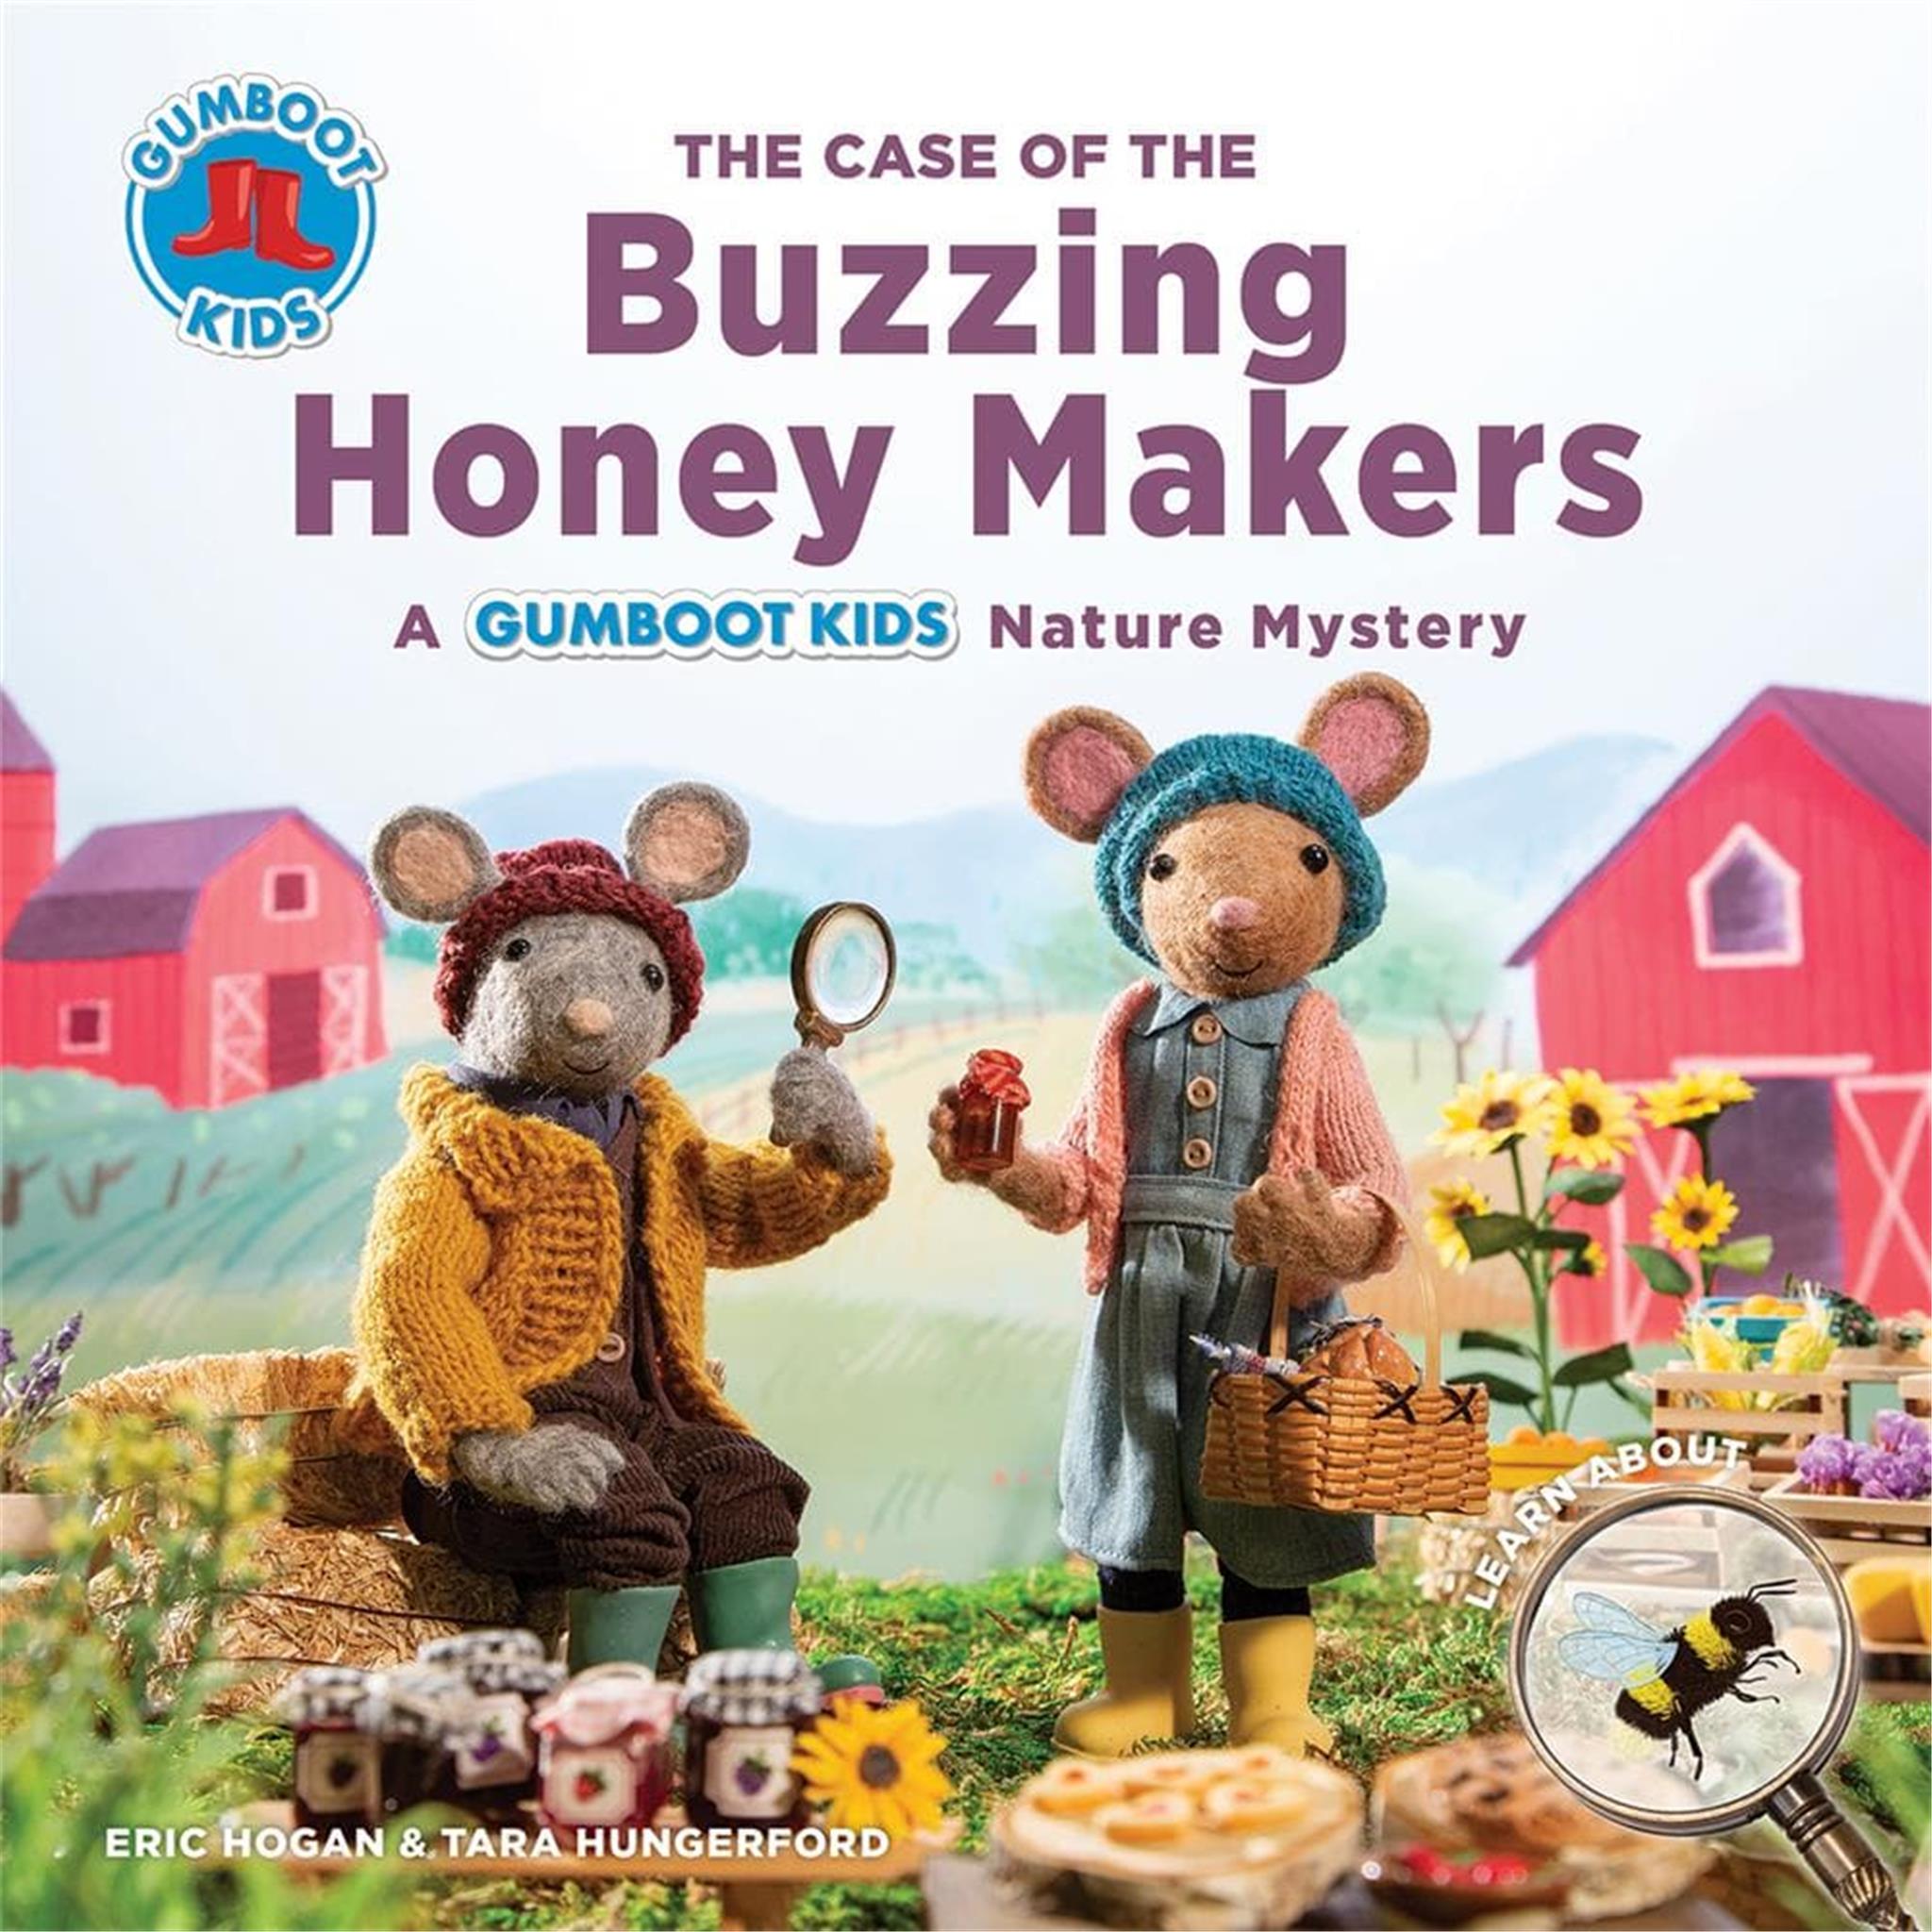 The Case of the Buzzing Honey Makers: A Gumboot Kids Nature Mystery Book